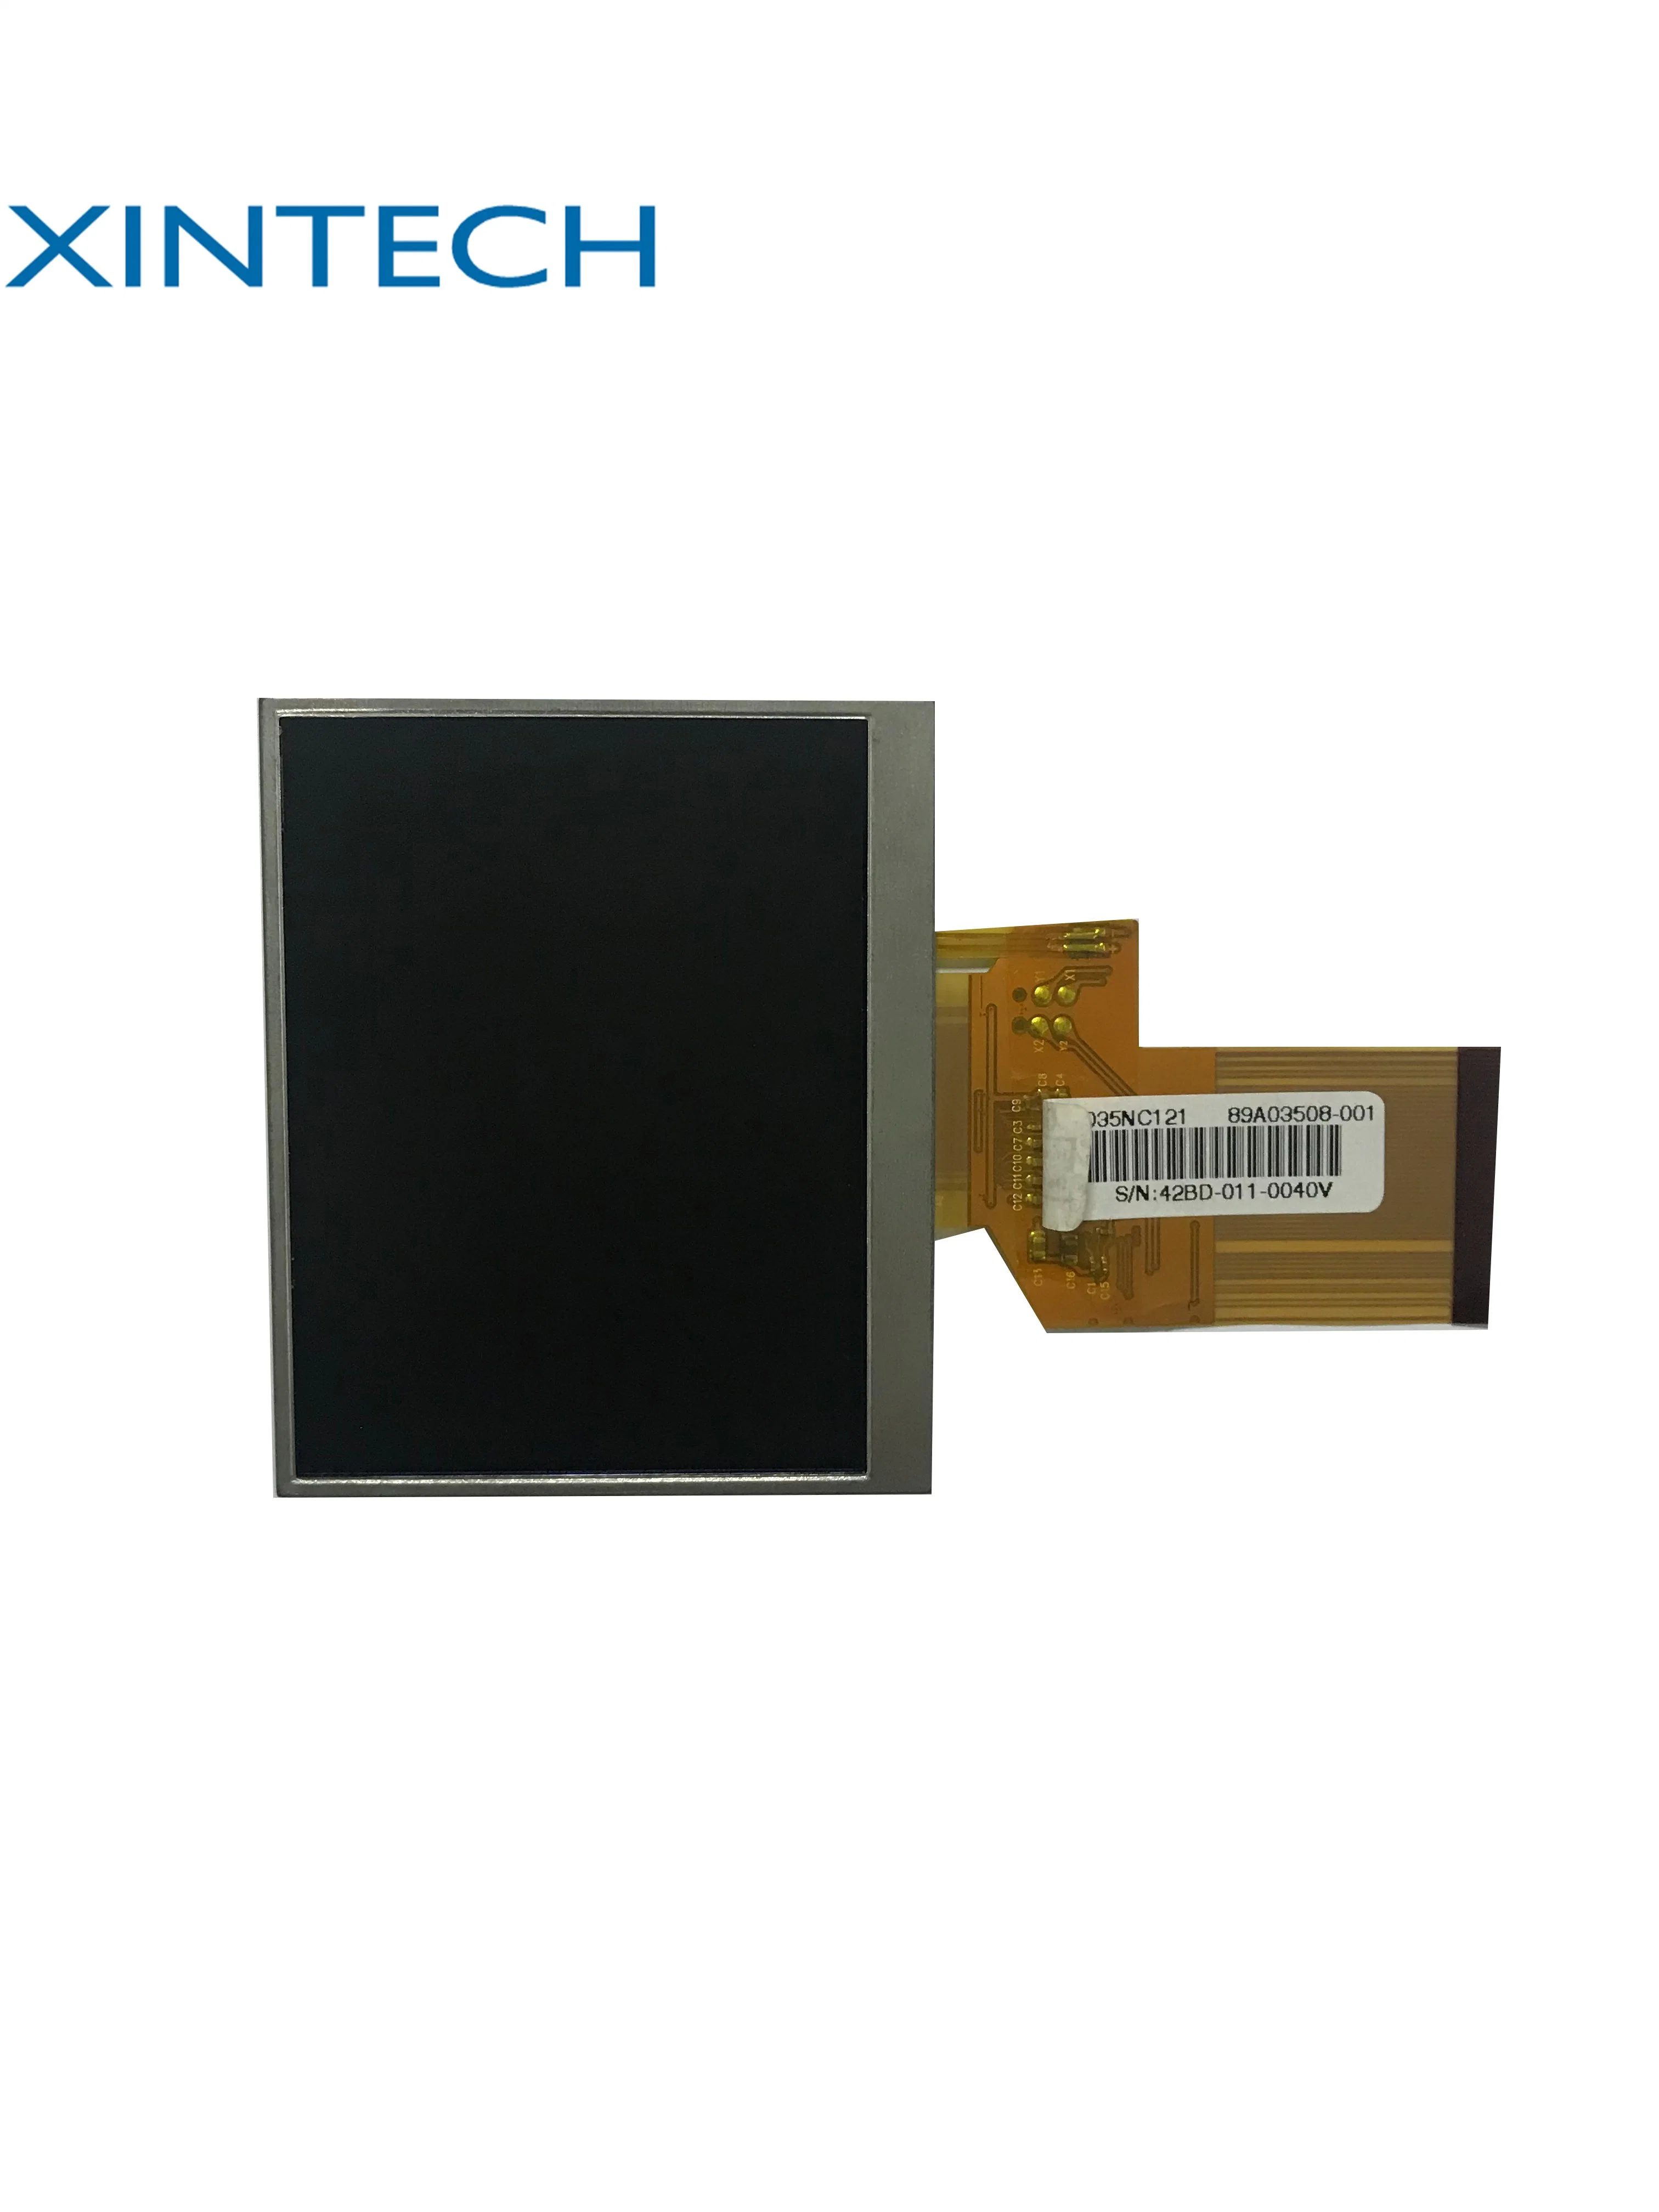 Hot Selling 2.3 Inch Sunlight Readable TFT Module LCD Panel